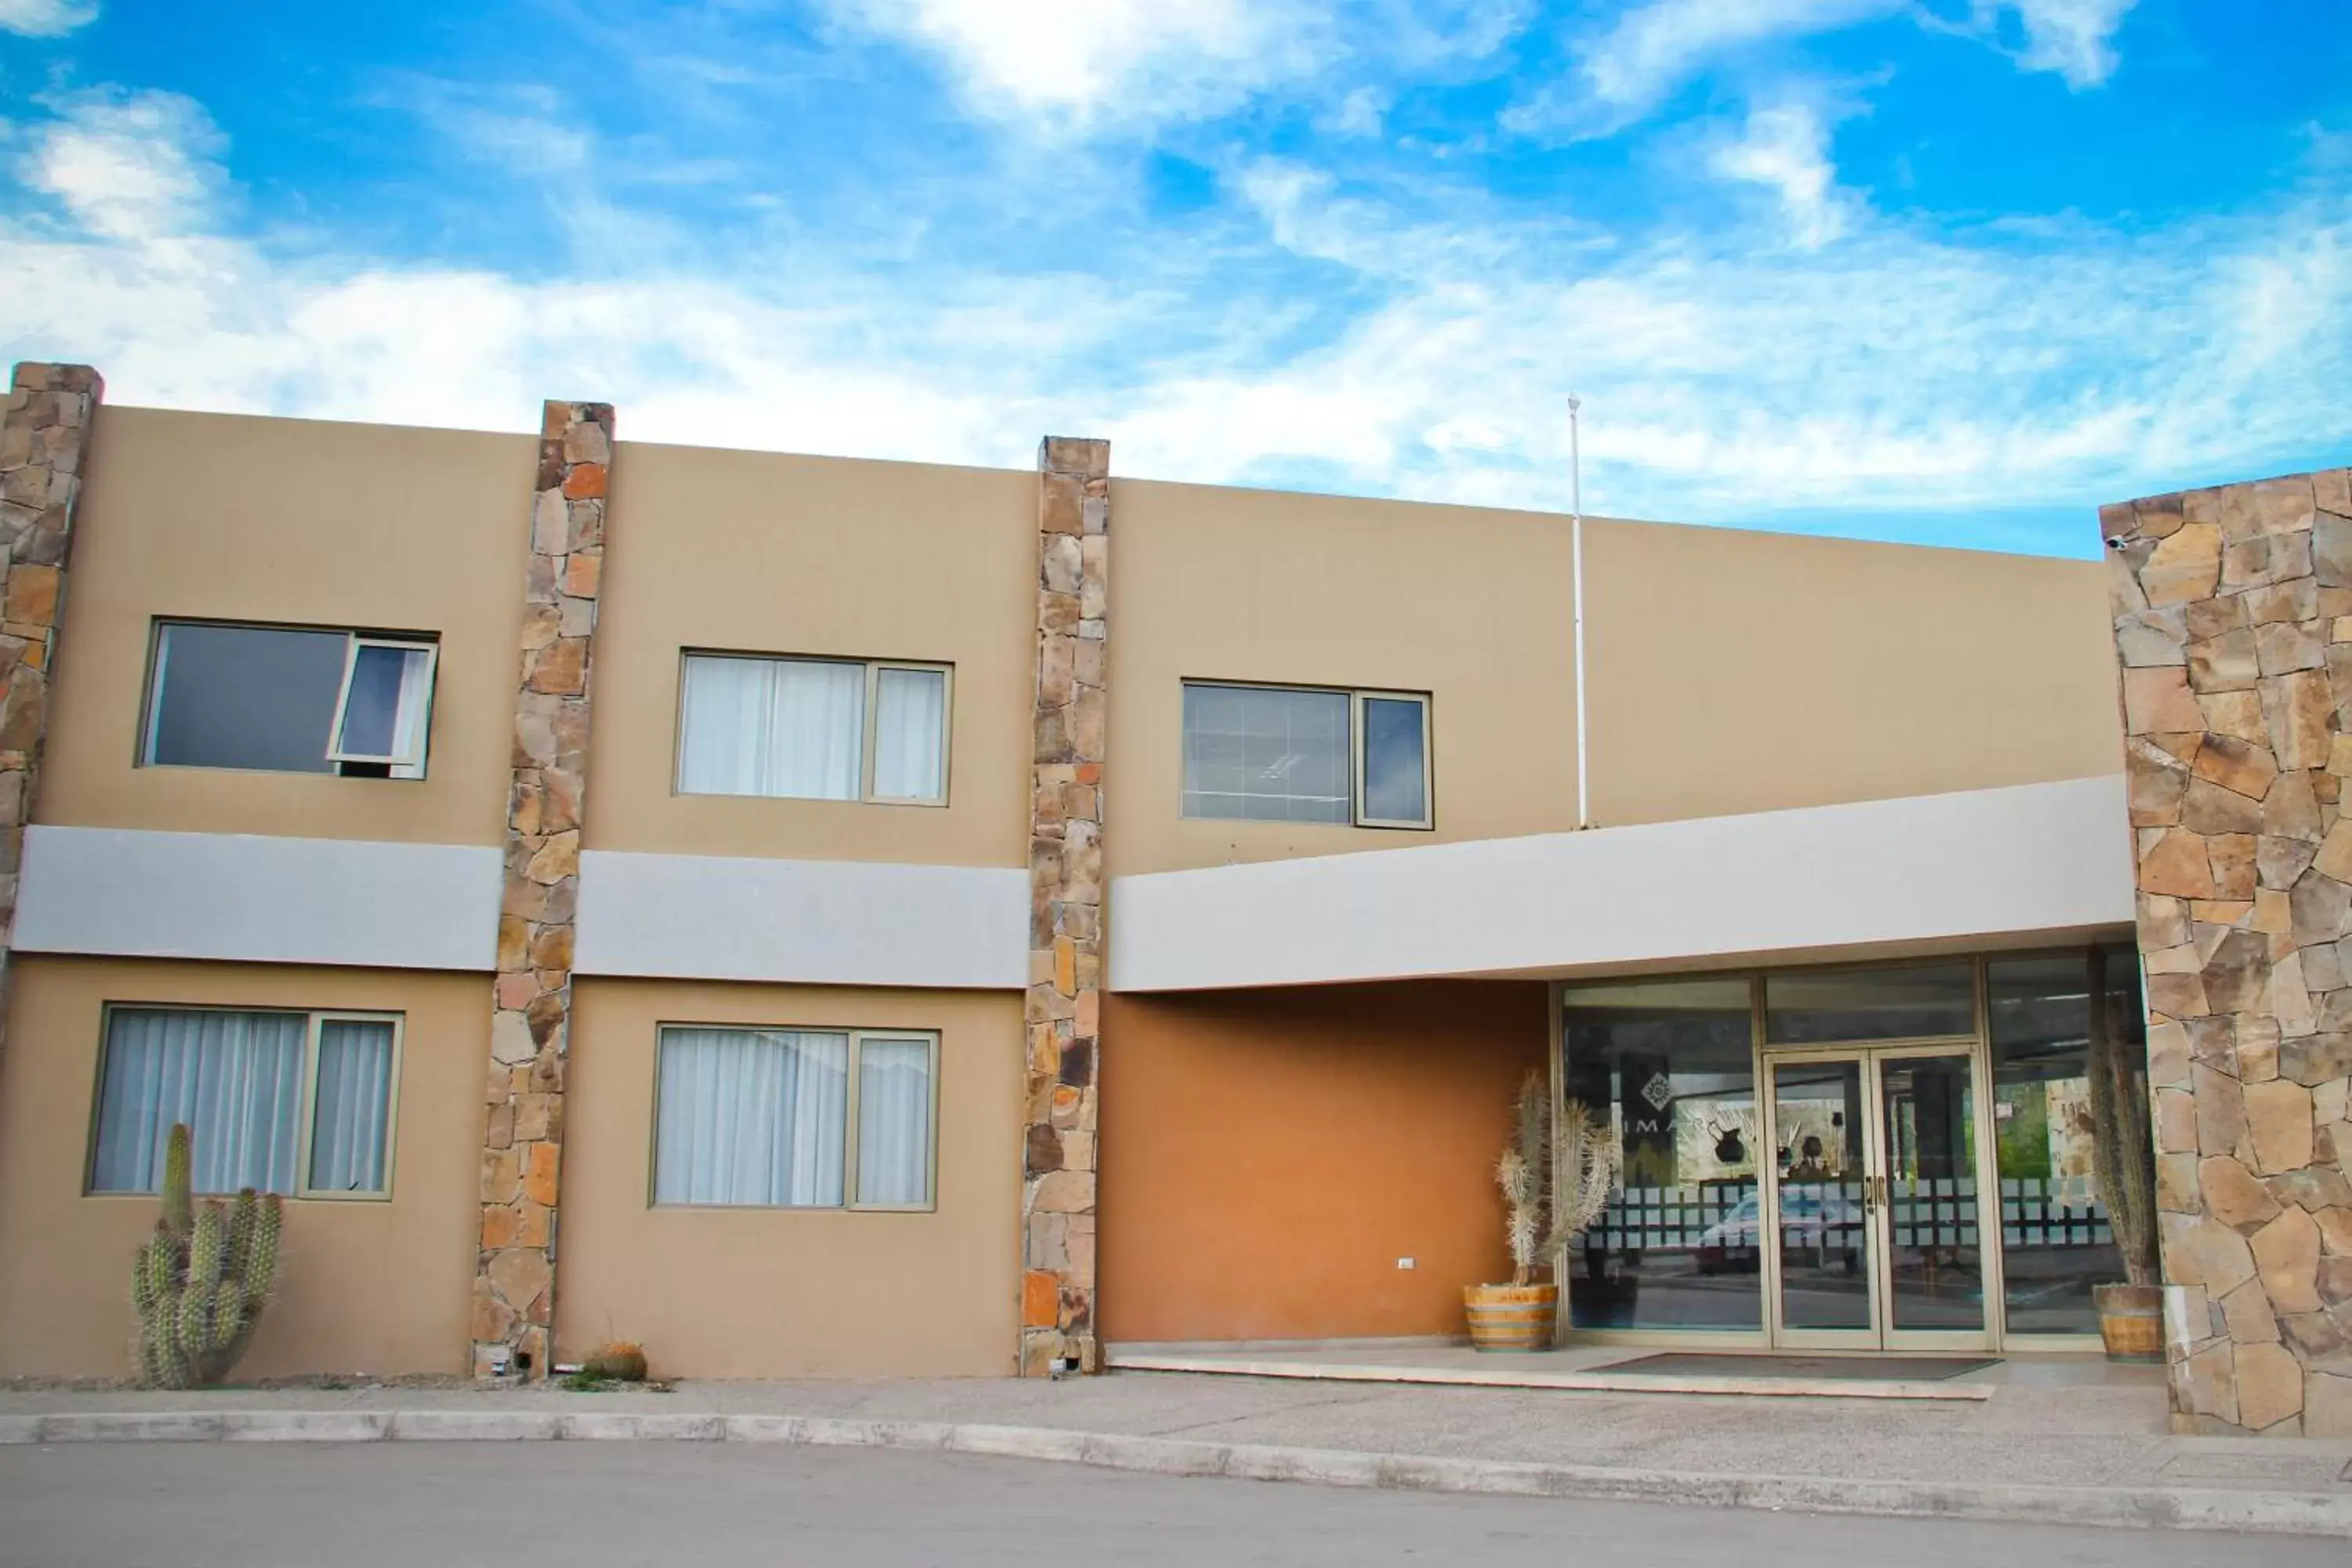 Off site, Property Building in Hotel Limari